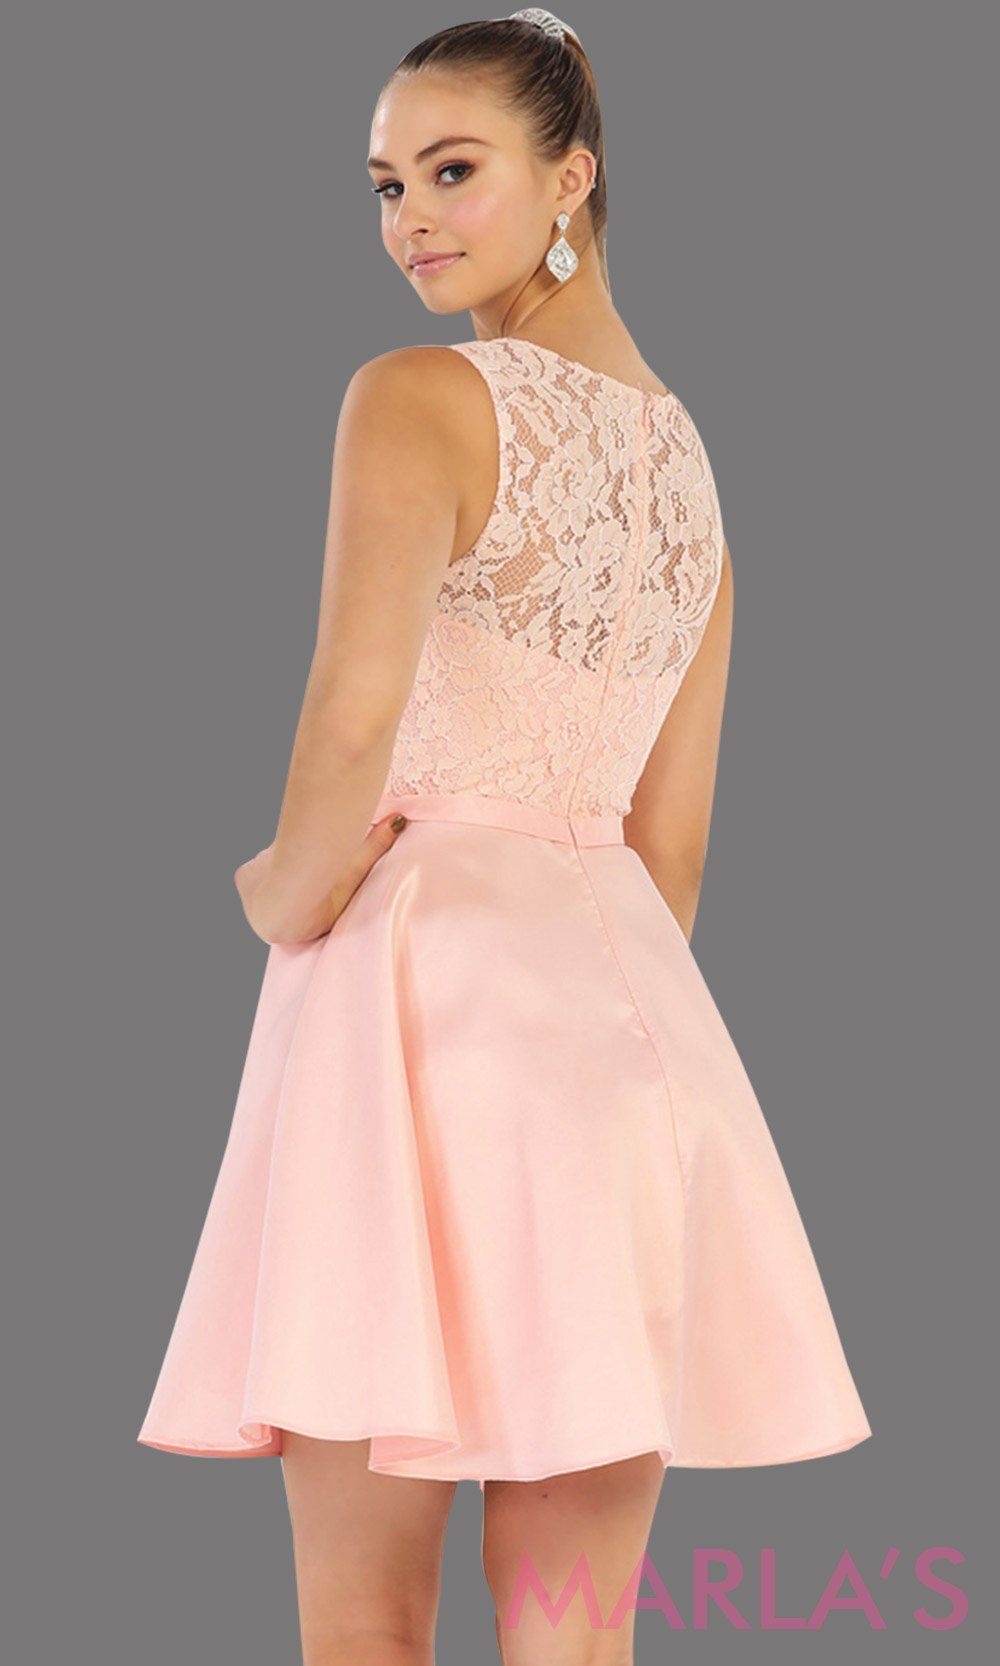 Back of Short simple  semi formal blush pink dress with lace bodice and satin skirt. Light pink dress is perfect for grade 8 grad, graduation, short prom, damas quinceanera, confirmation. Available in plus sizes.grade 8 grad dresses, graduation dresses